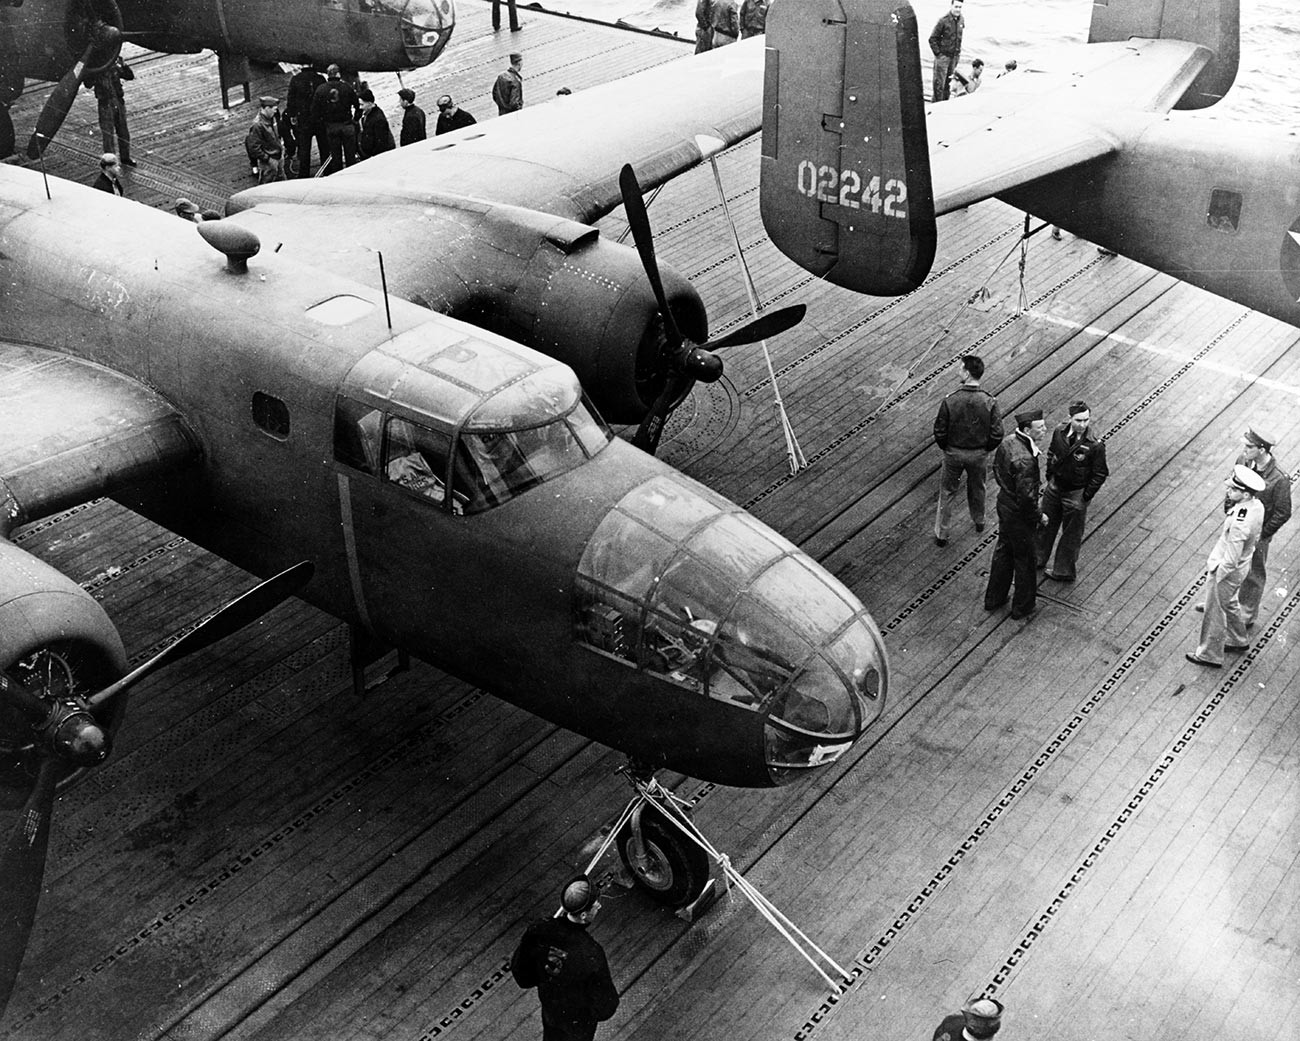 Army Air Forces B-25B bombers parked on the flight deck of the USS Hornet.